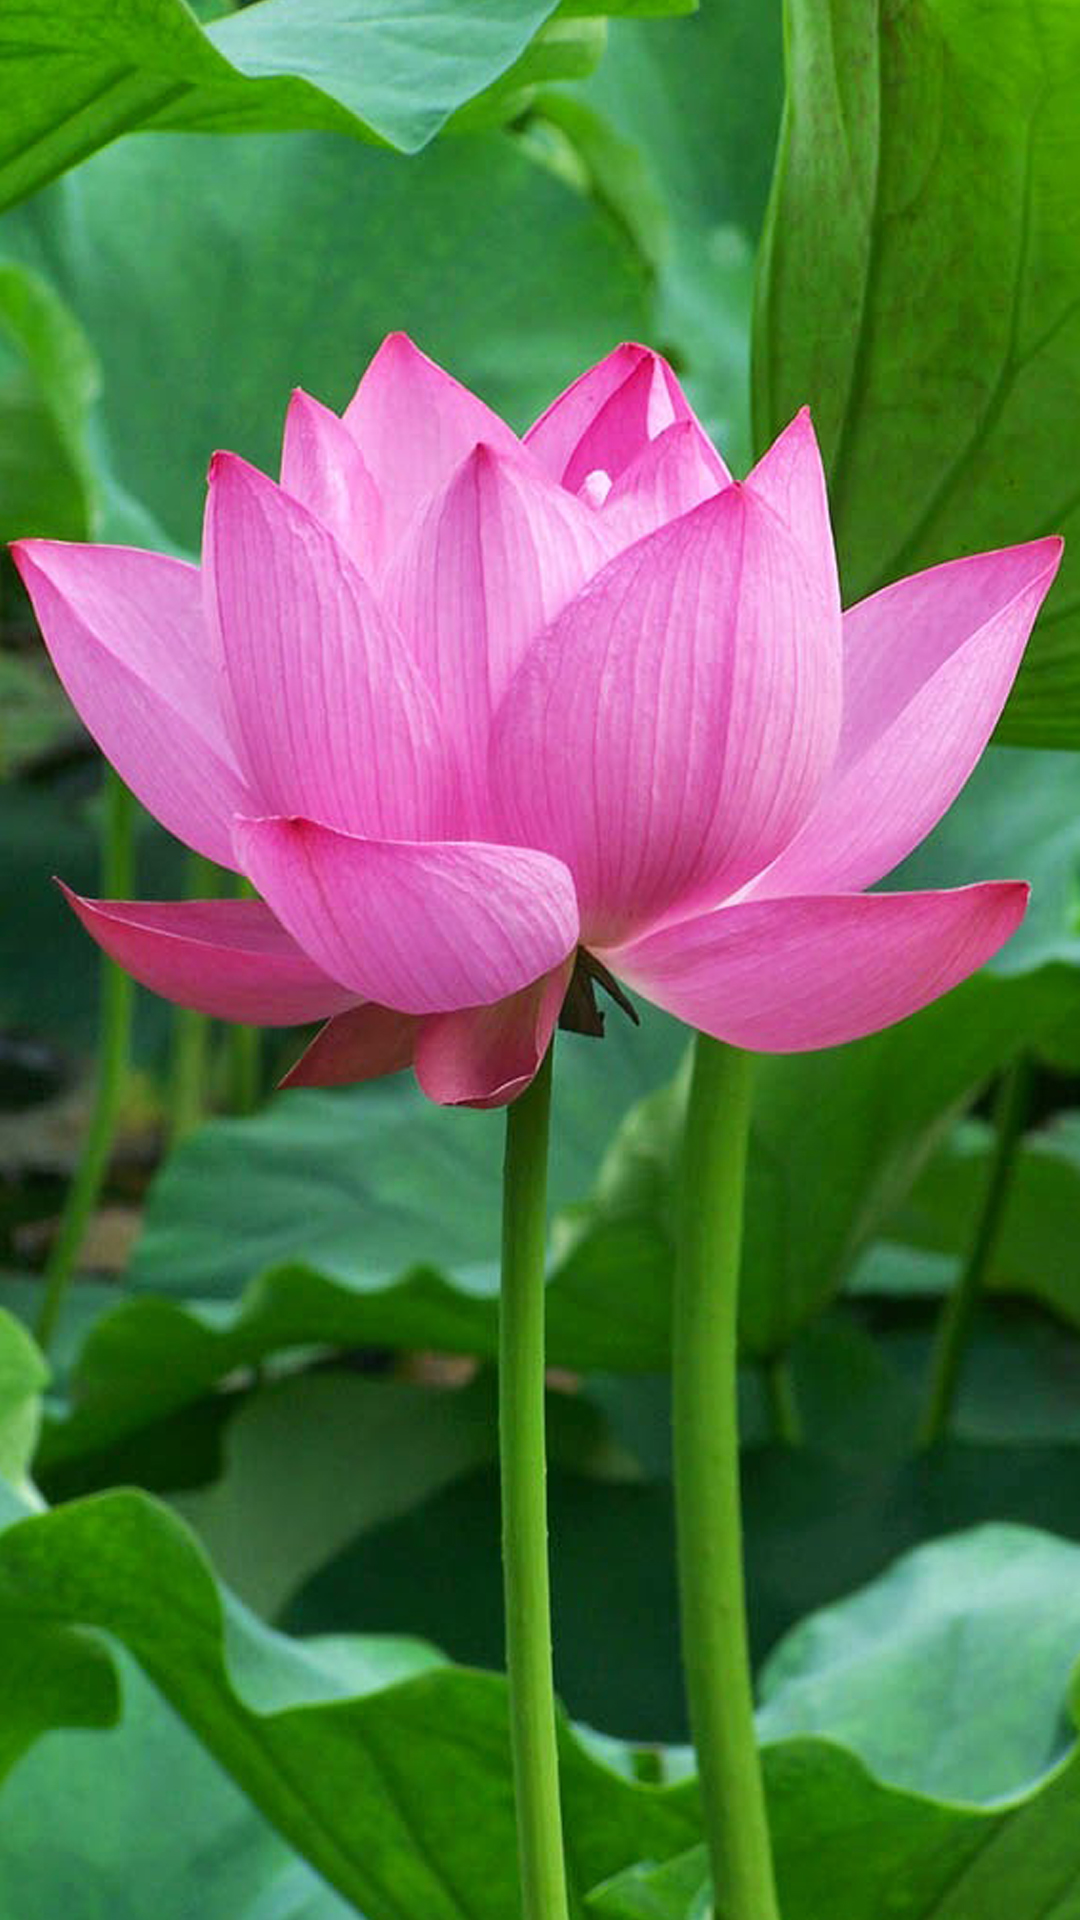 OnePlus 5 Wallpaper with Lotus Flower Background - HD ...